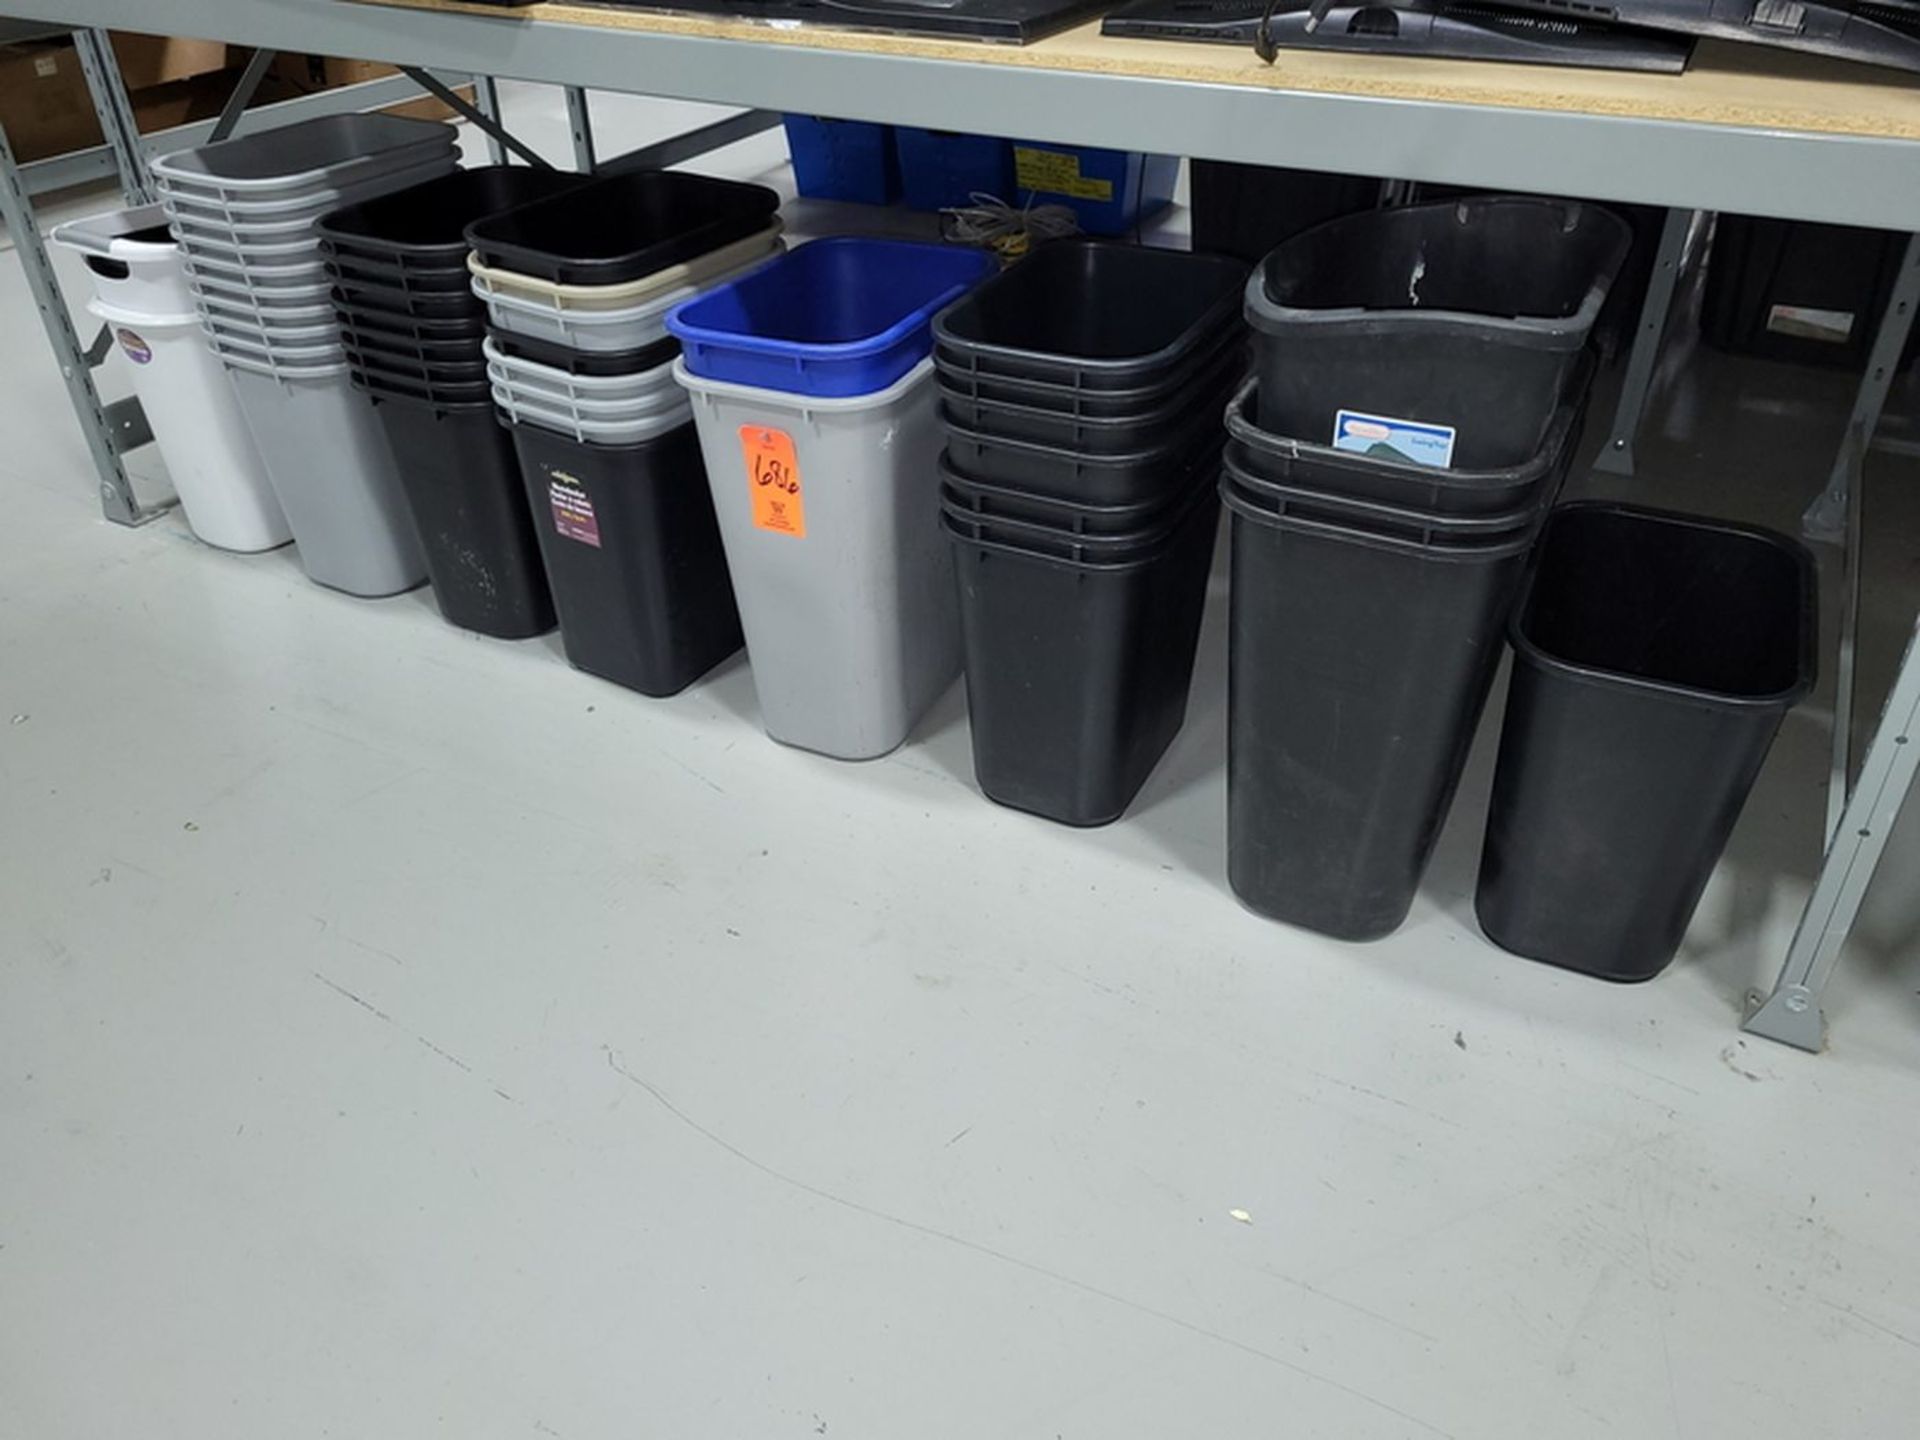 Lot - (42) approx. Assorted Plastic Waste Containers;